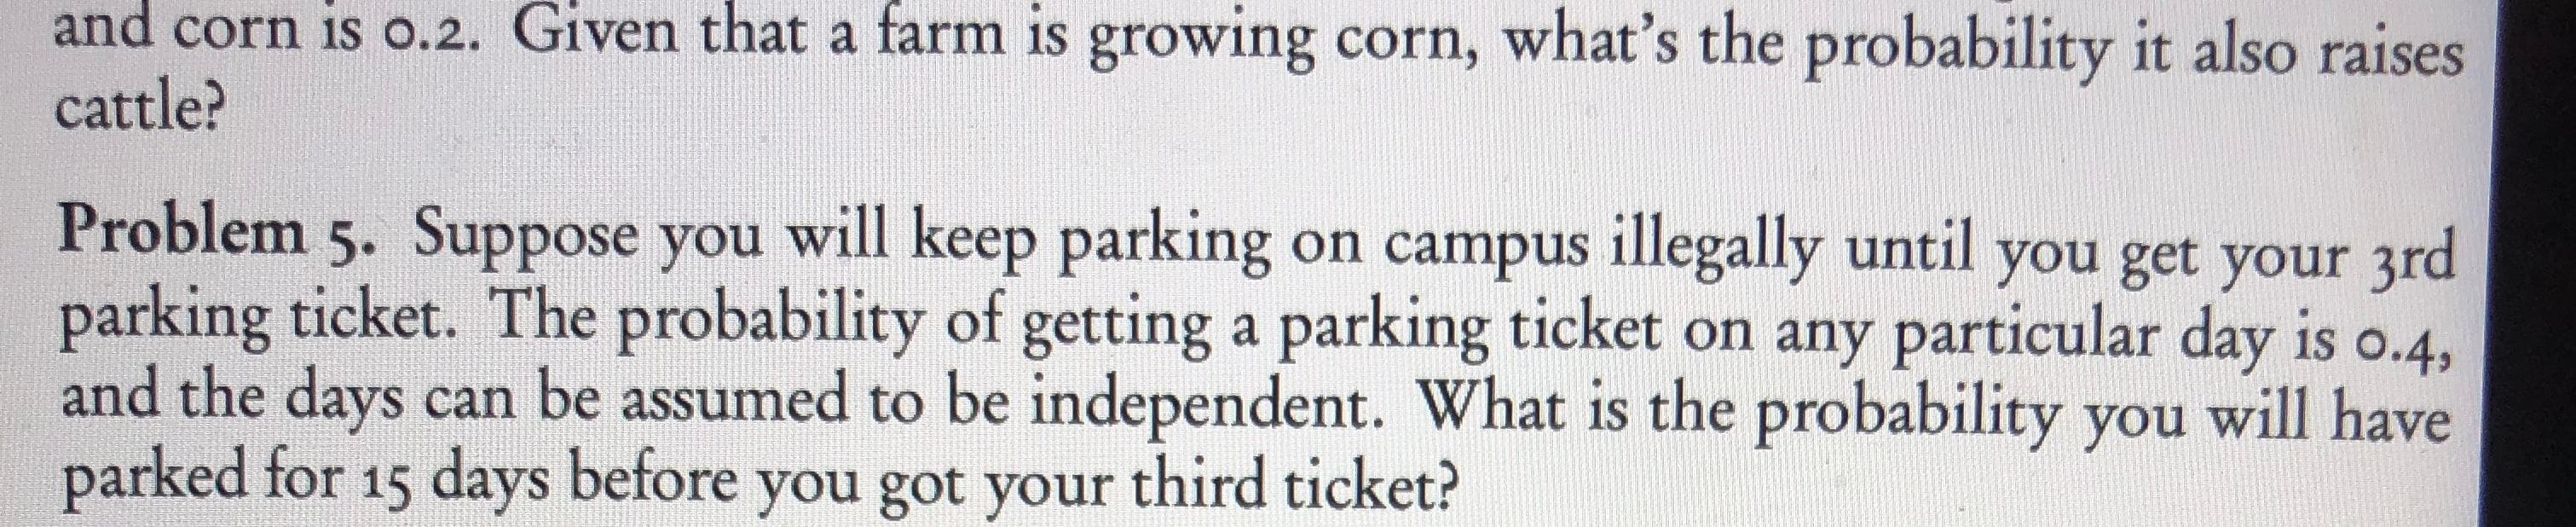 and corn is o.2. Given that a farm is growing corn, what's the probability it also raises
cattle?
Problem 5. Suppose you will keep parking on campus illegally until you get your 3rd
parking ticket. The probability of getting a parking ticket on any particular day is o.4,
and the days can be assumed to be independent. What is the probability you will have
parked for 15 days before you got your third ticket?
